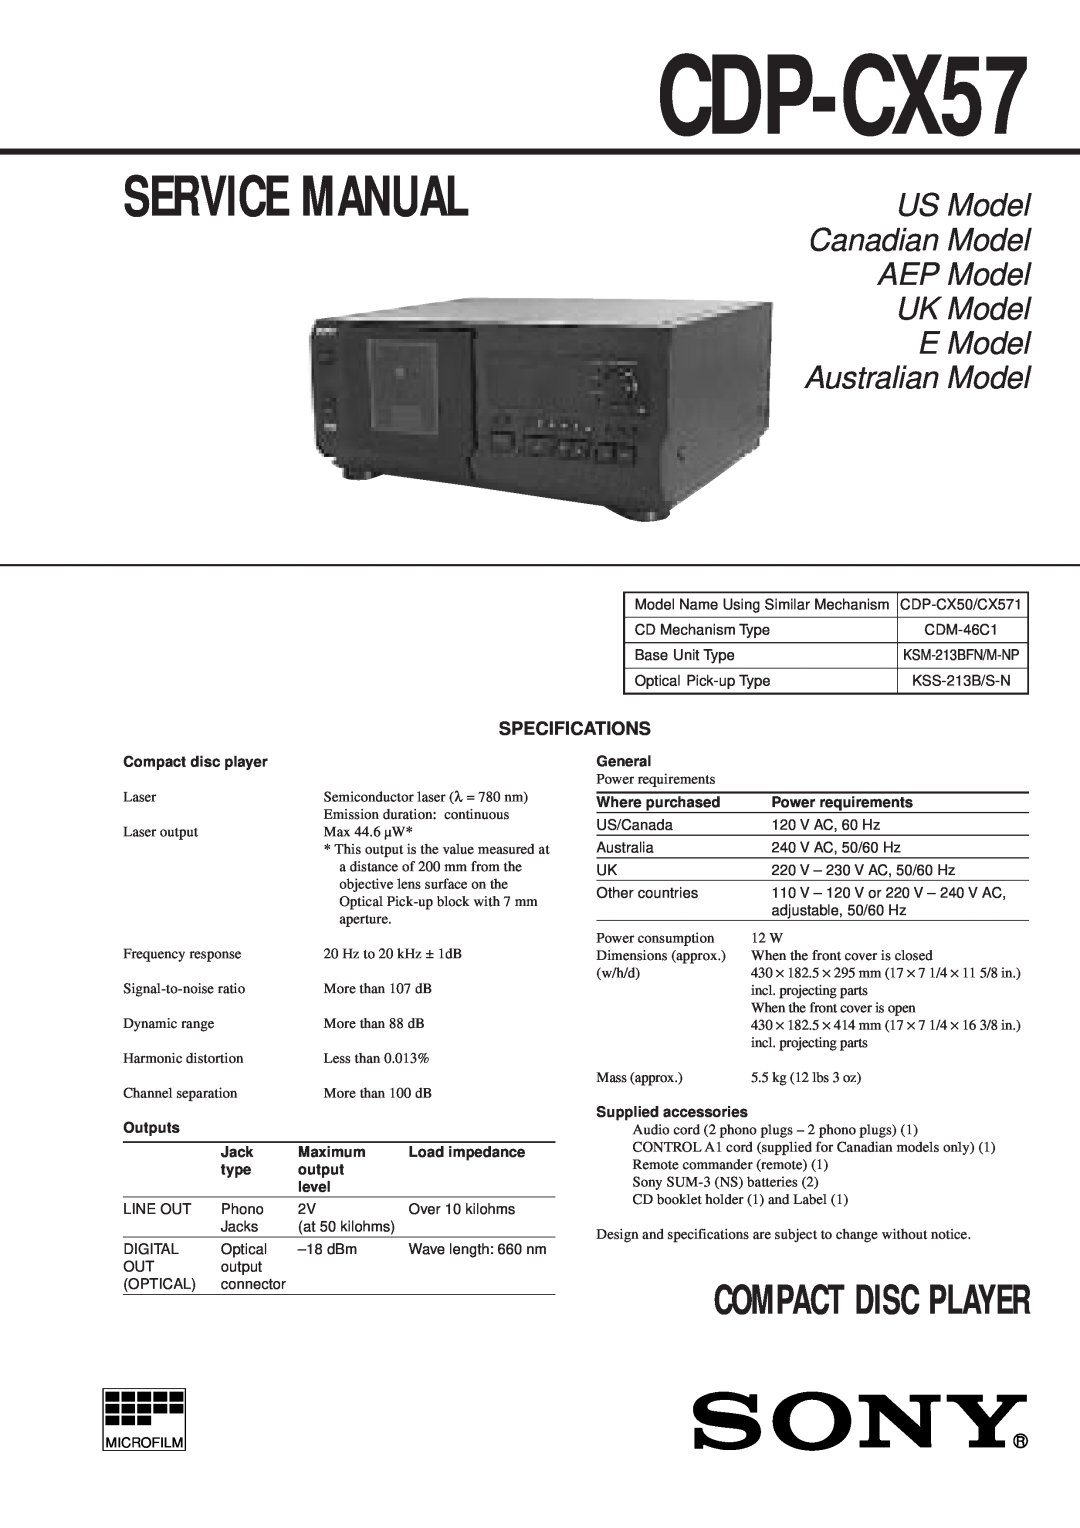 Technicolor - Thomson CDP-CX57 service manual Compact Disc Player, US Model Canadian Model AEP Model UK Model 